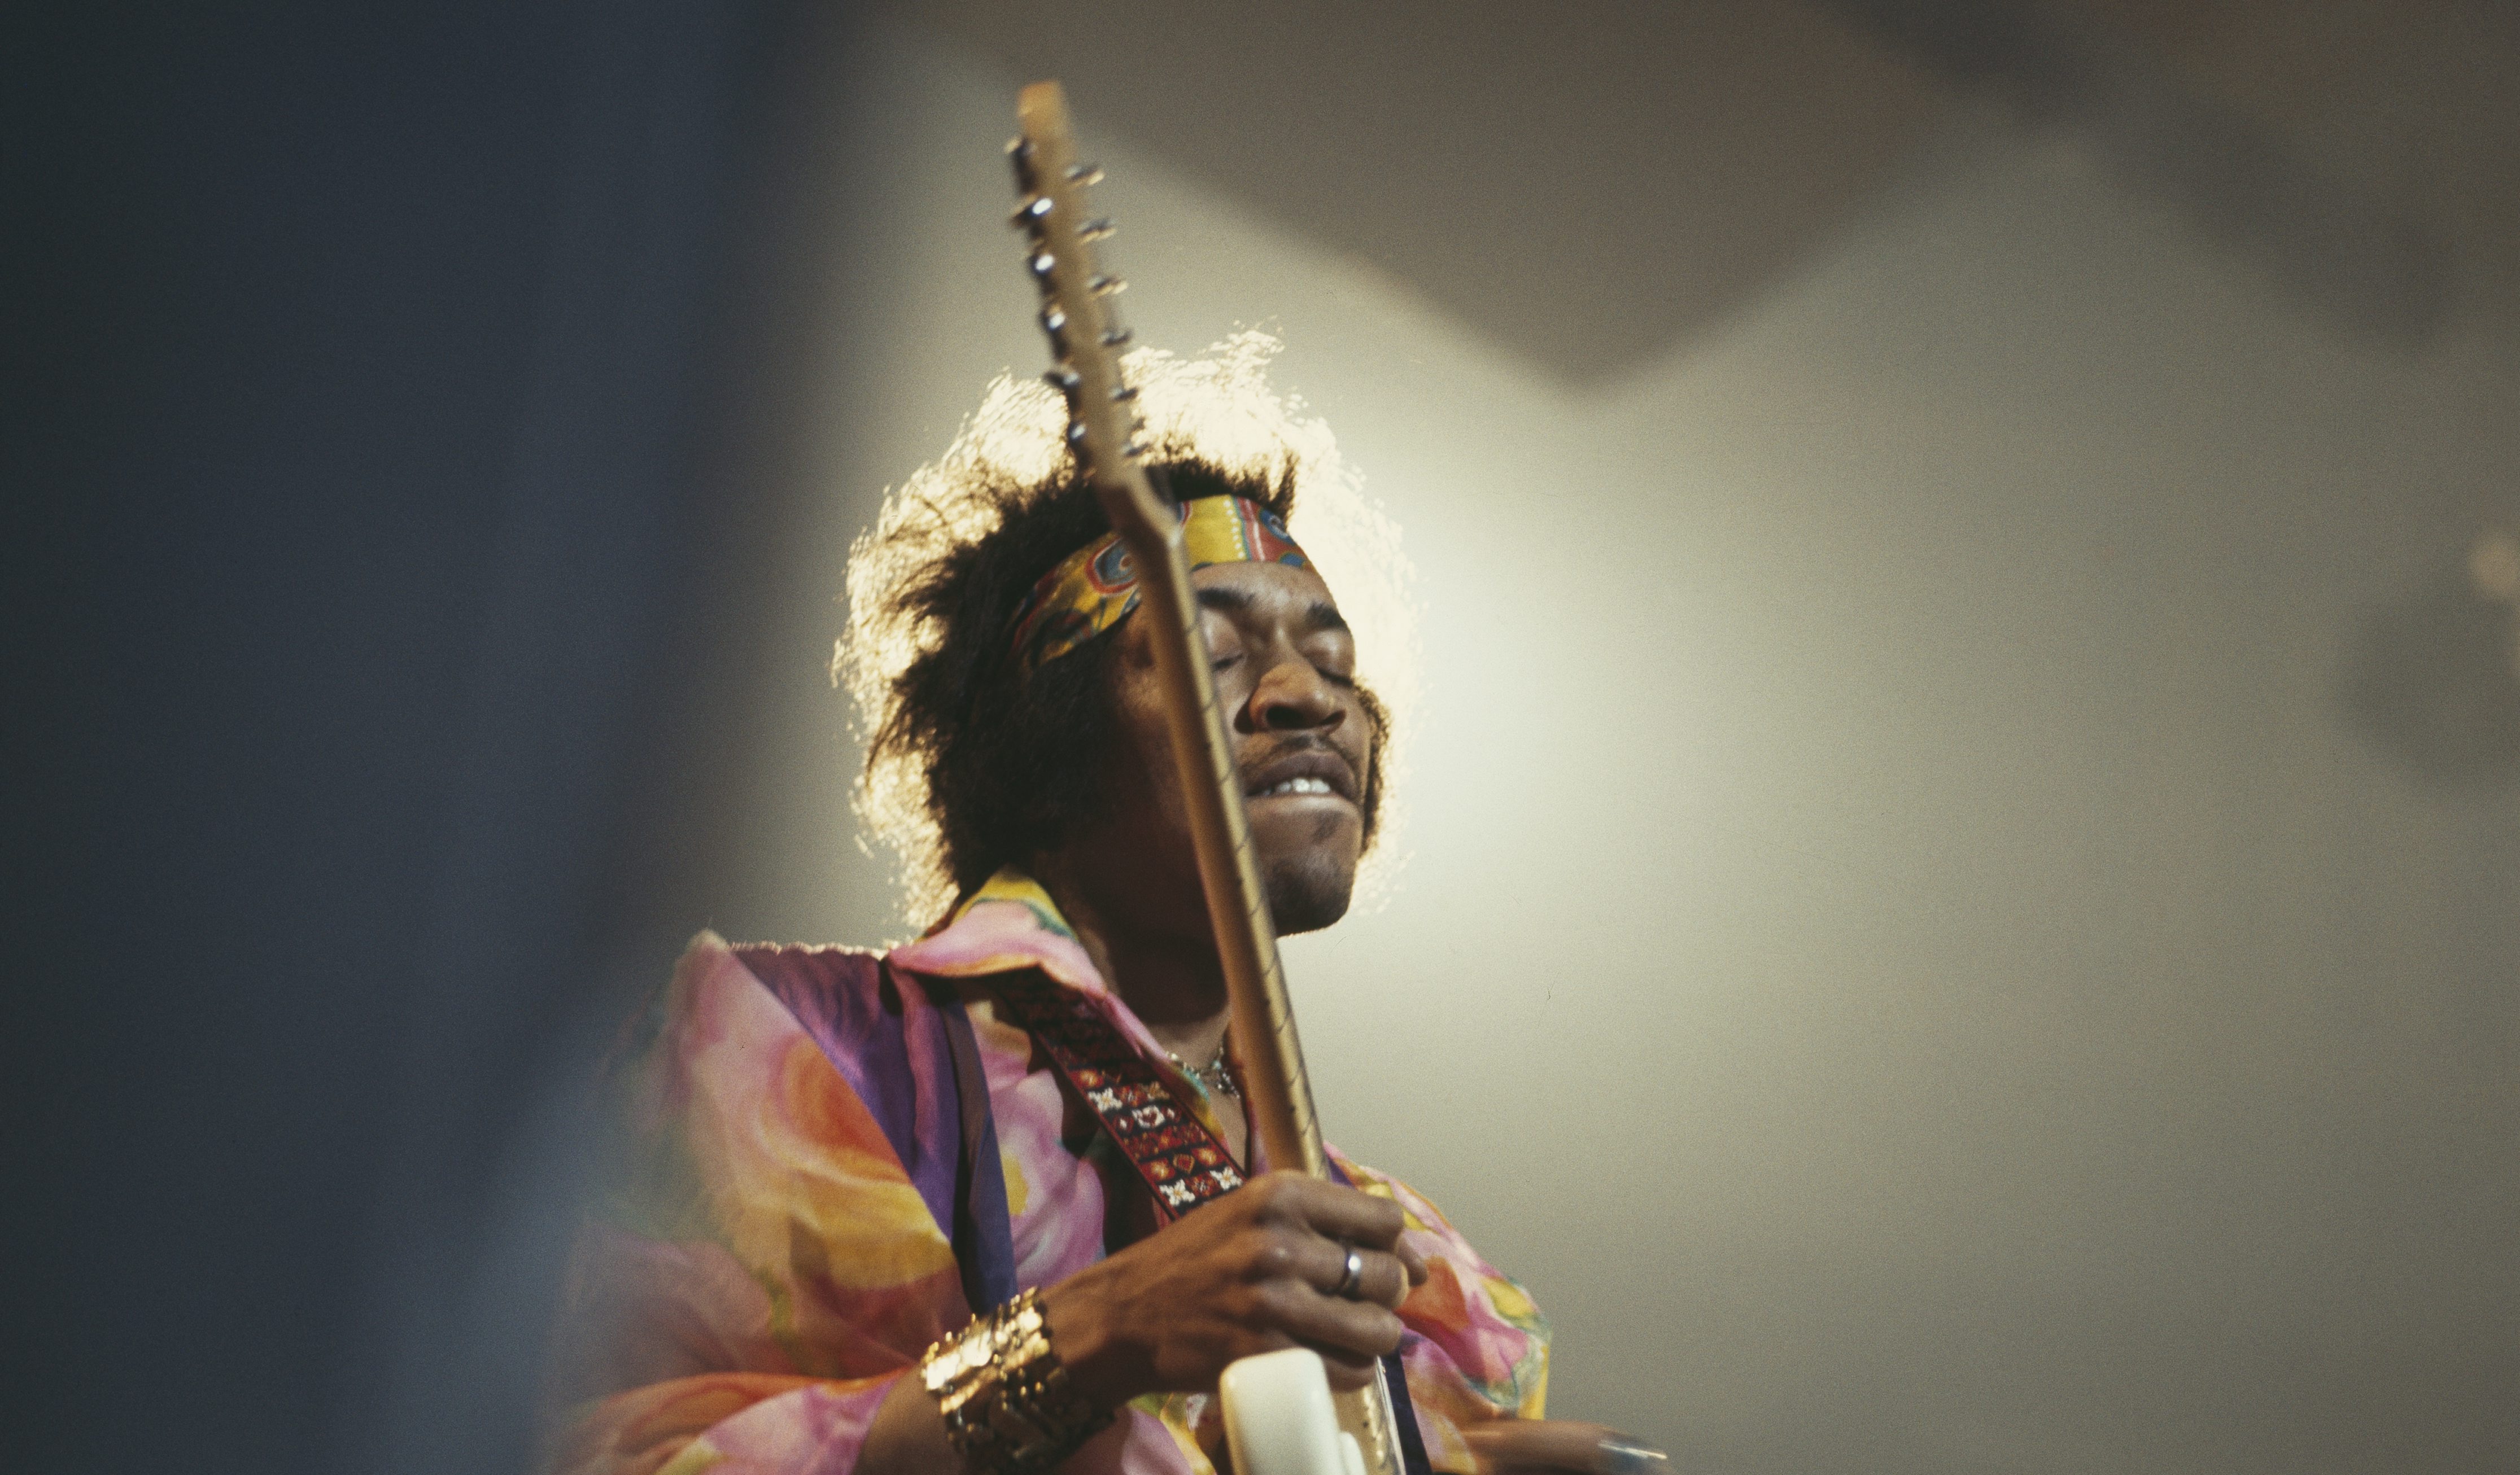 Jimi Hendrix, who performed at the Monterey Pop Festival in 1967, playing guitar